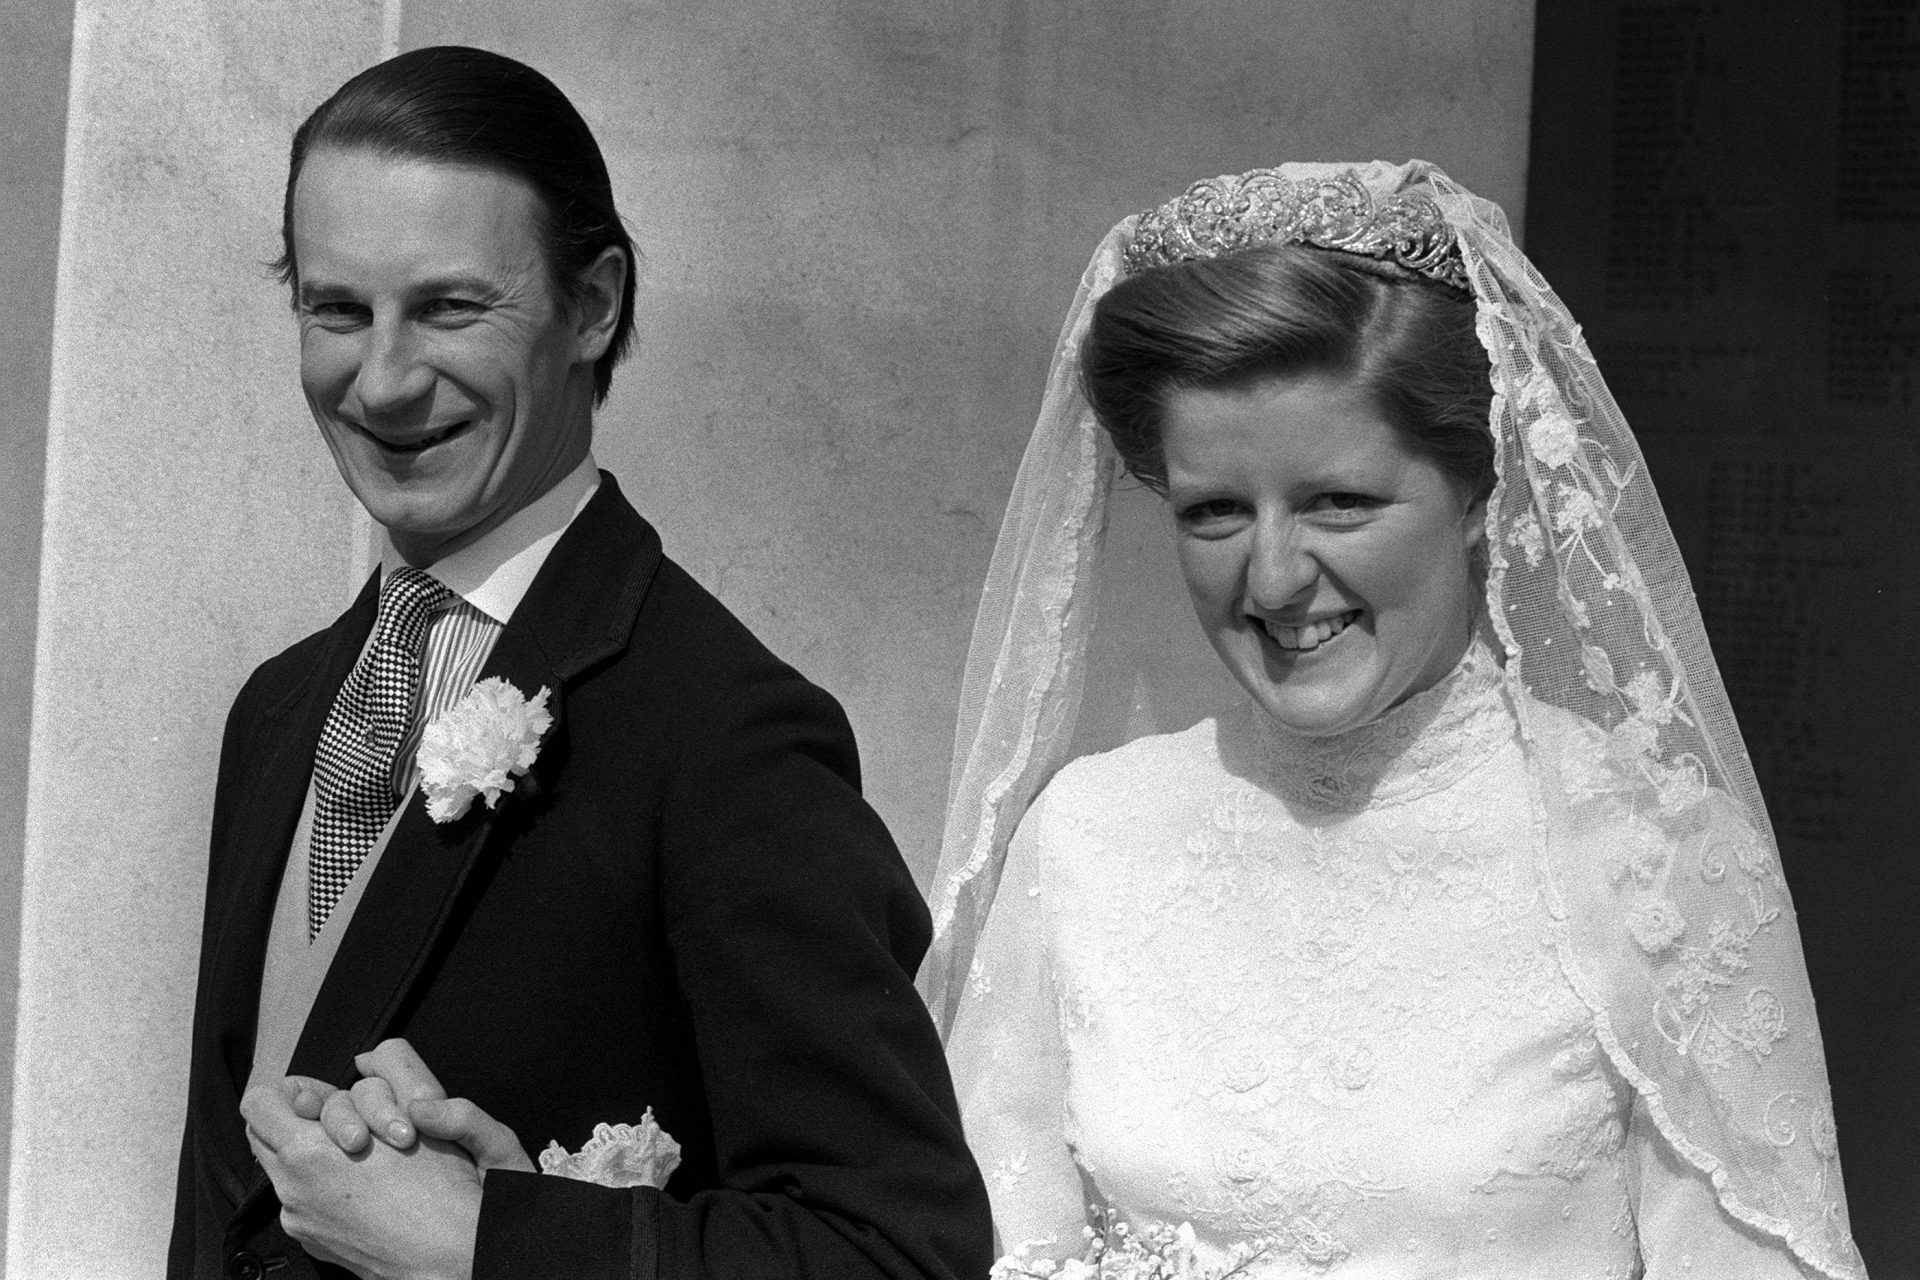 Married to Princess Diana's sister and they had three children